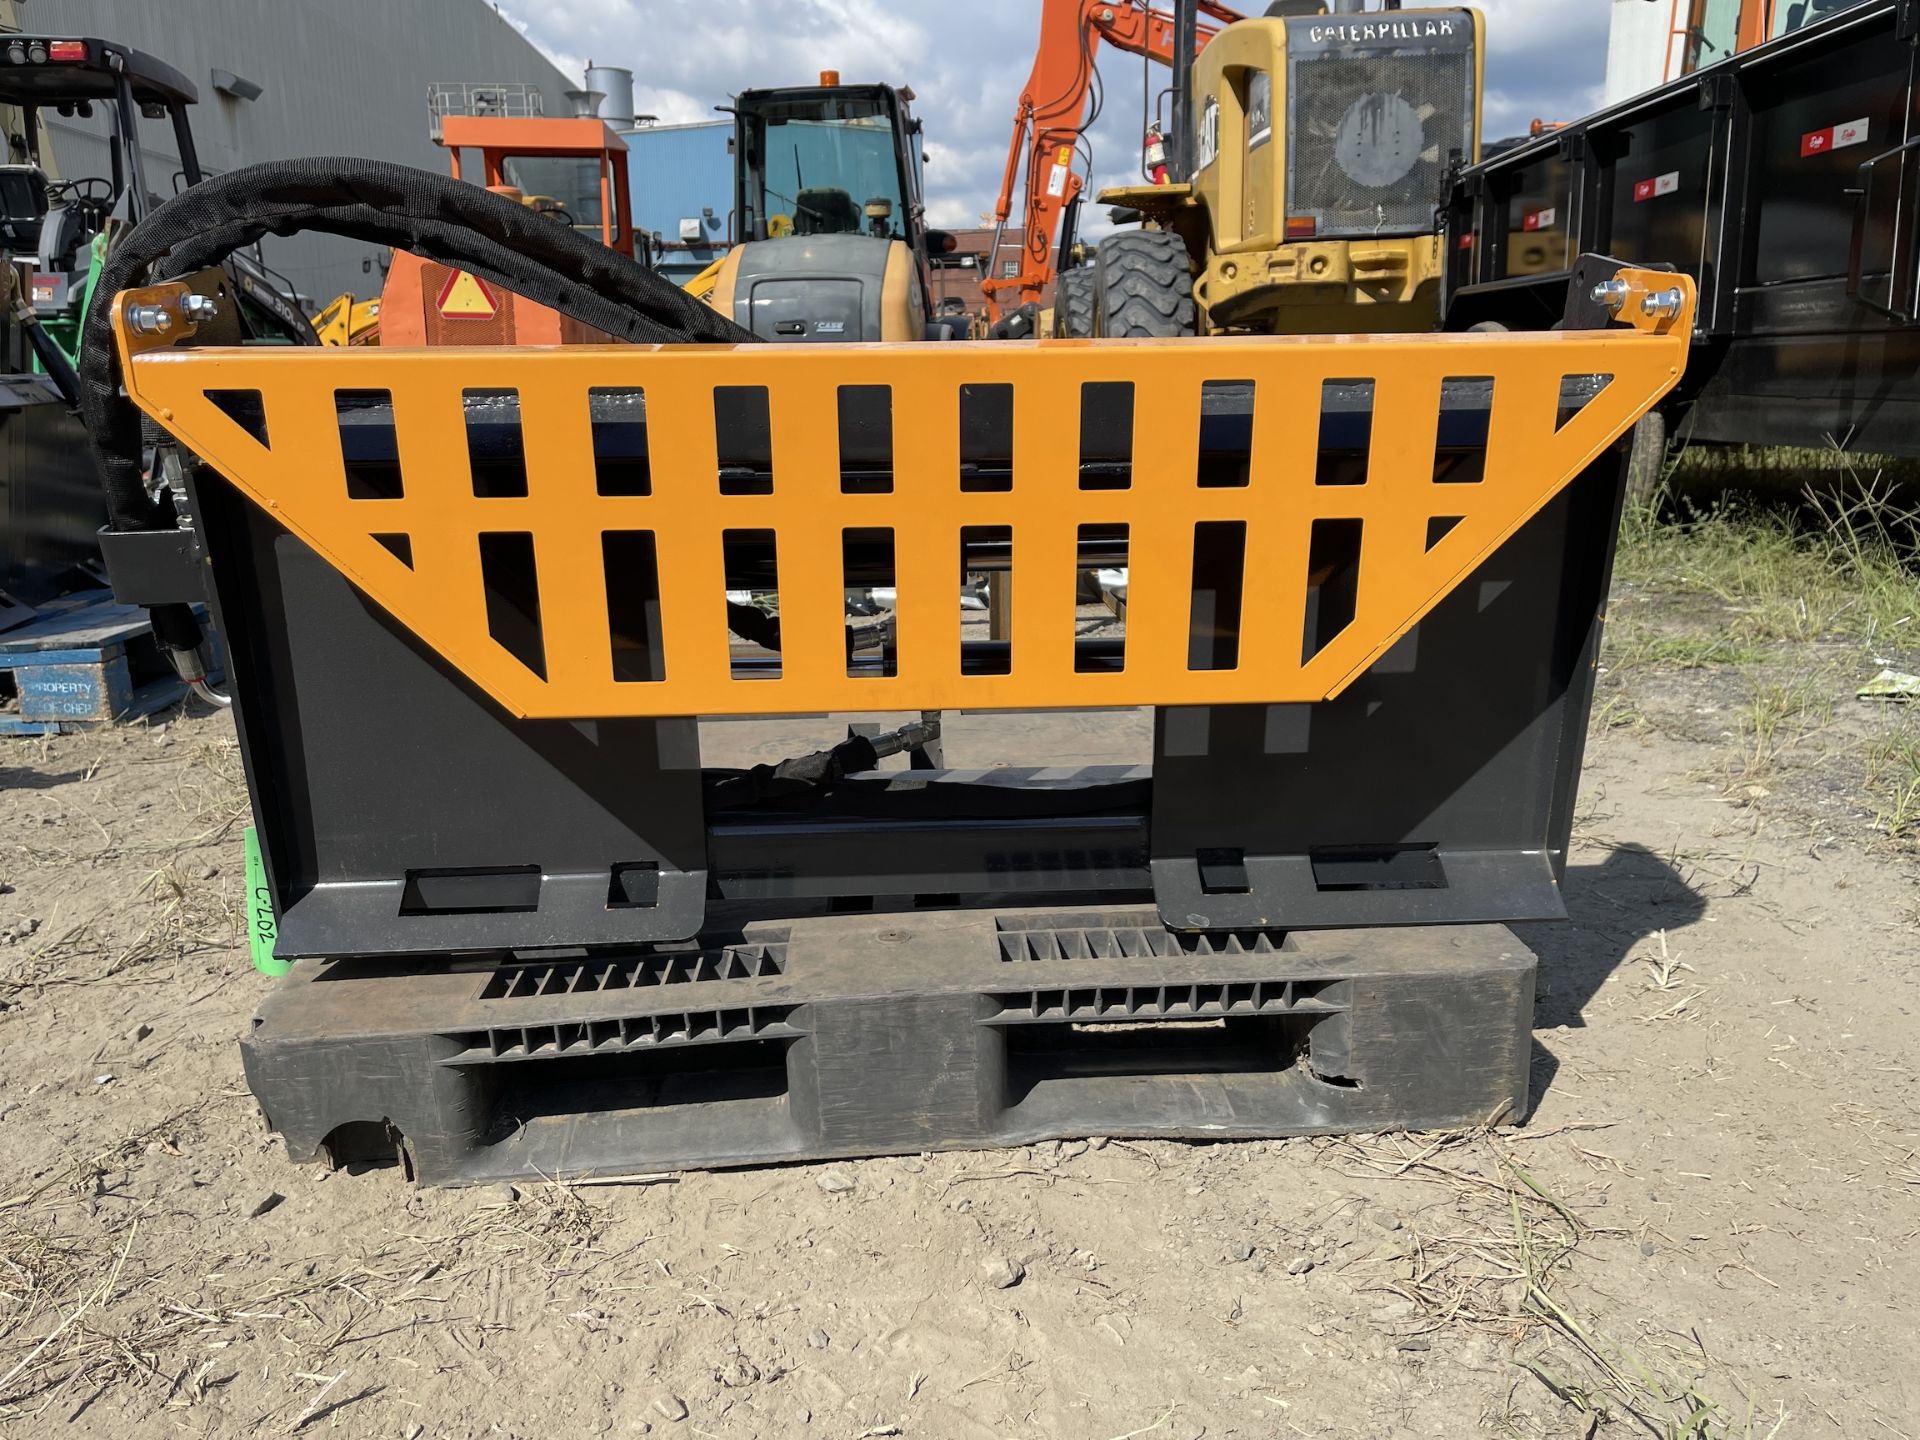 New Wolverine Skid Steer Fork Attachments (C202) - Image 5 of 7